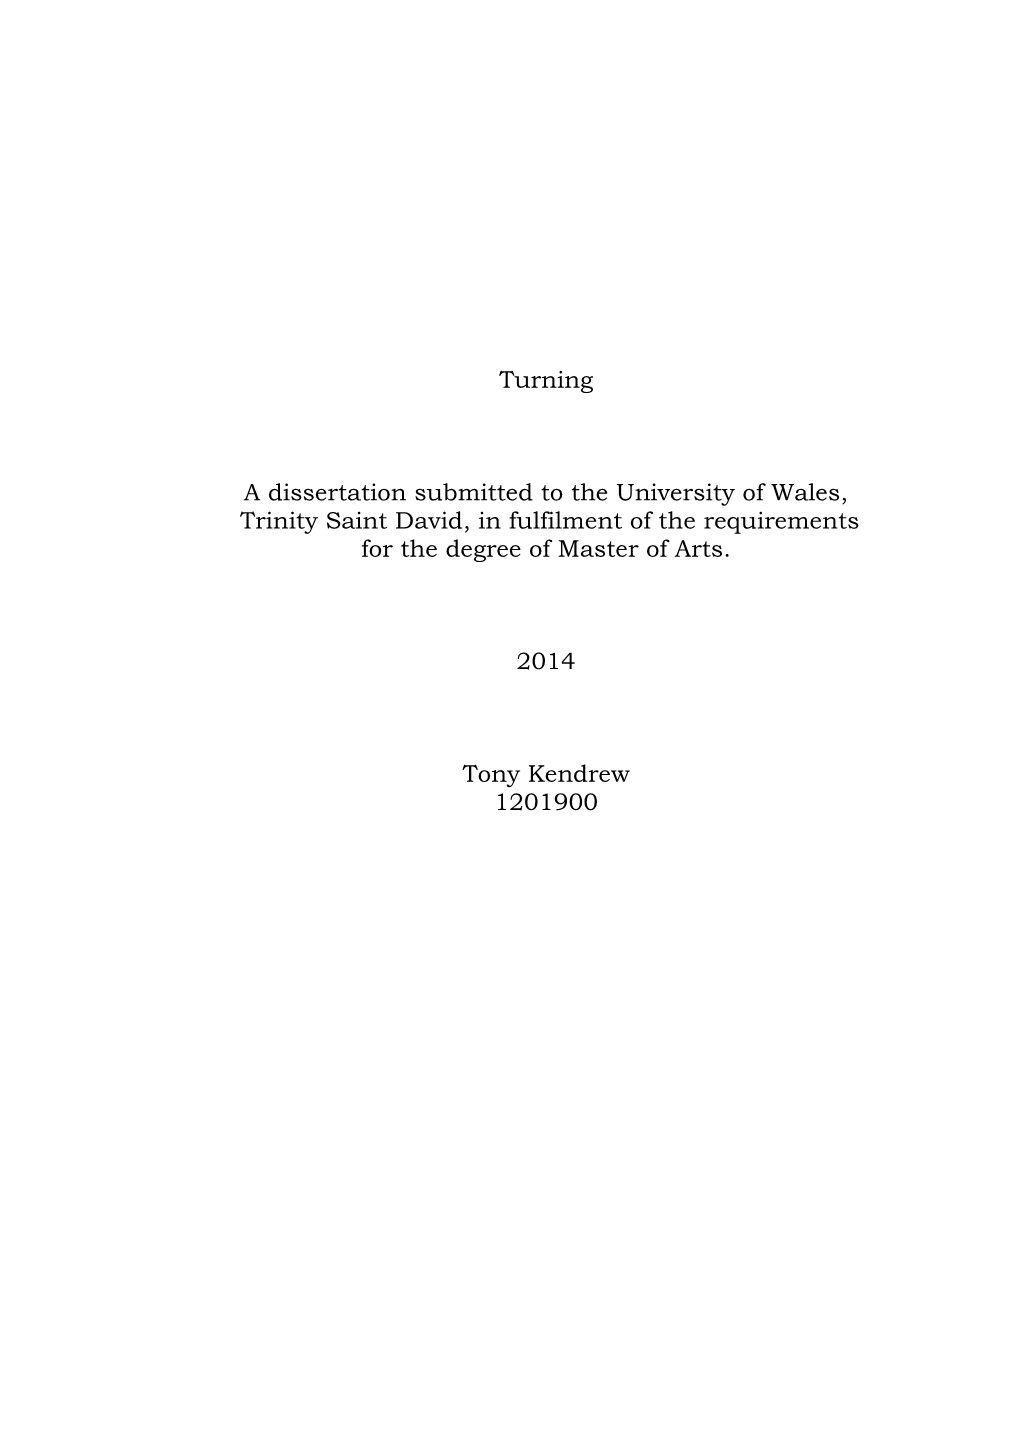 Turning a Dissertation Submitted to the University of Wales, Trinity Saint